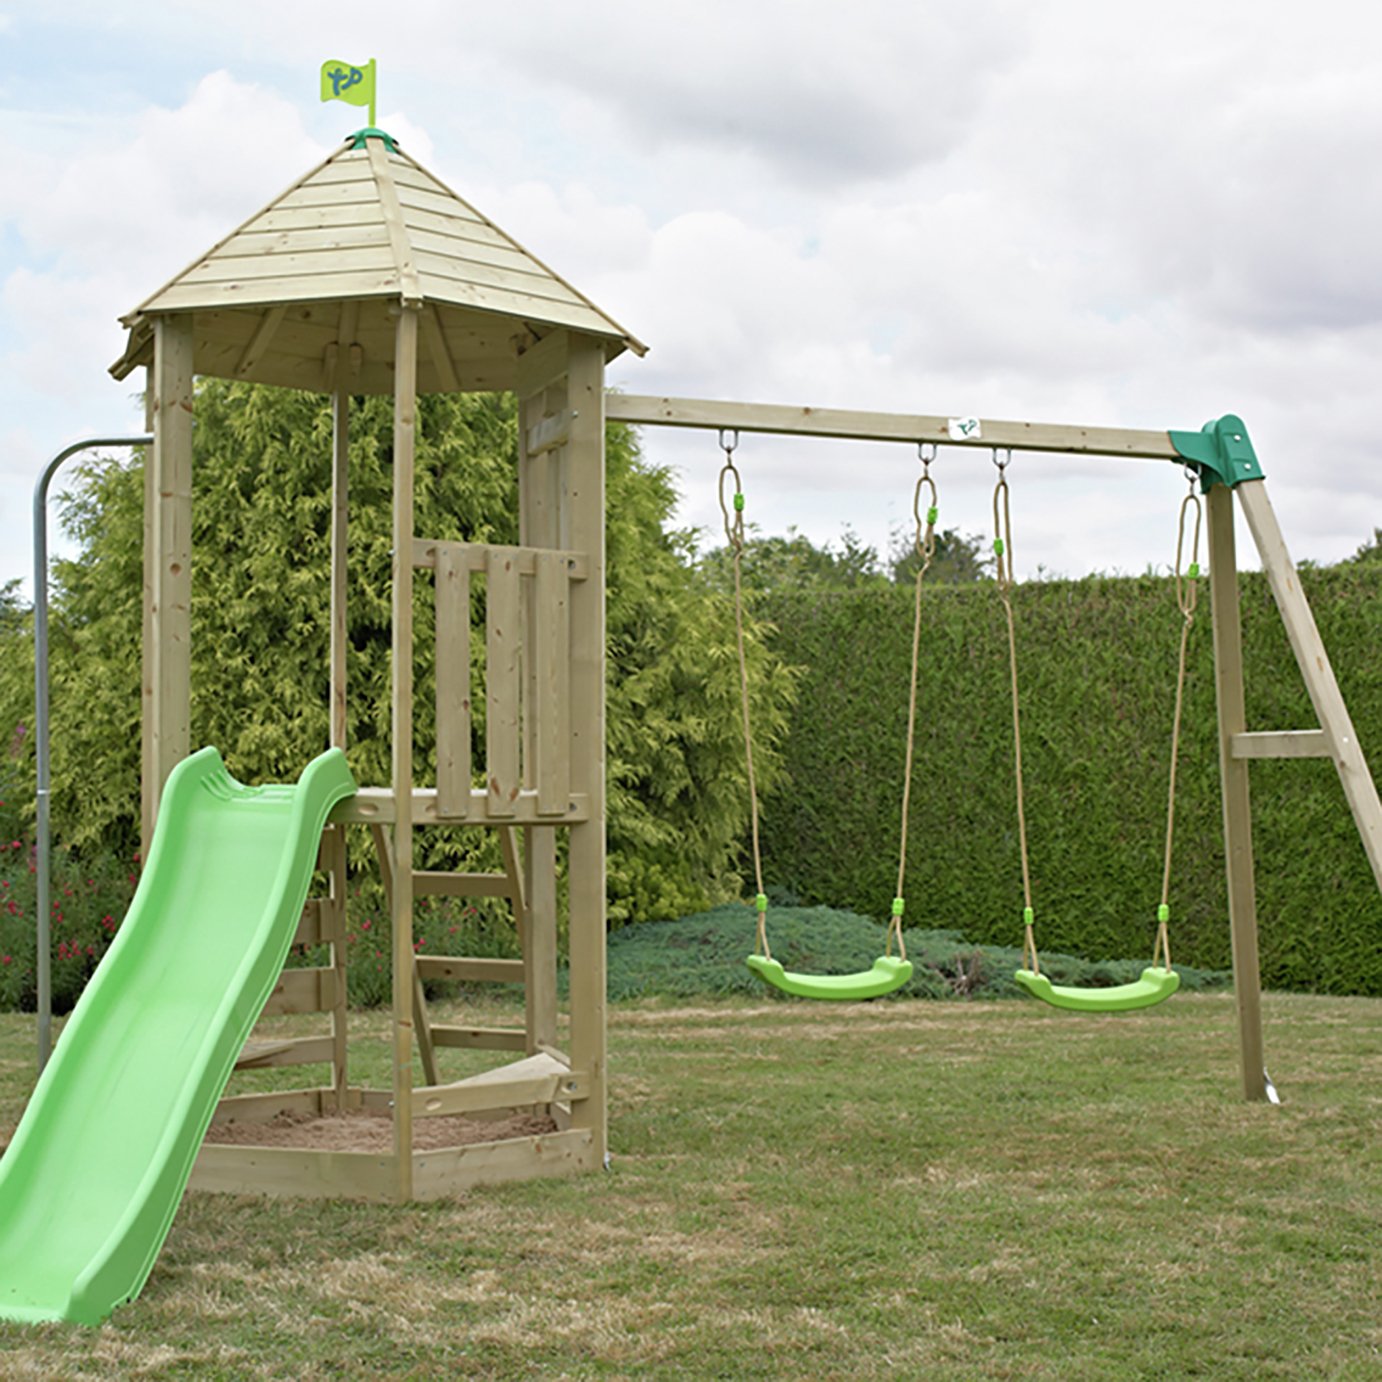 TP Castlewood Wooden Swing Set and Tower Slide Review